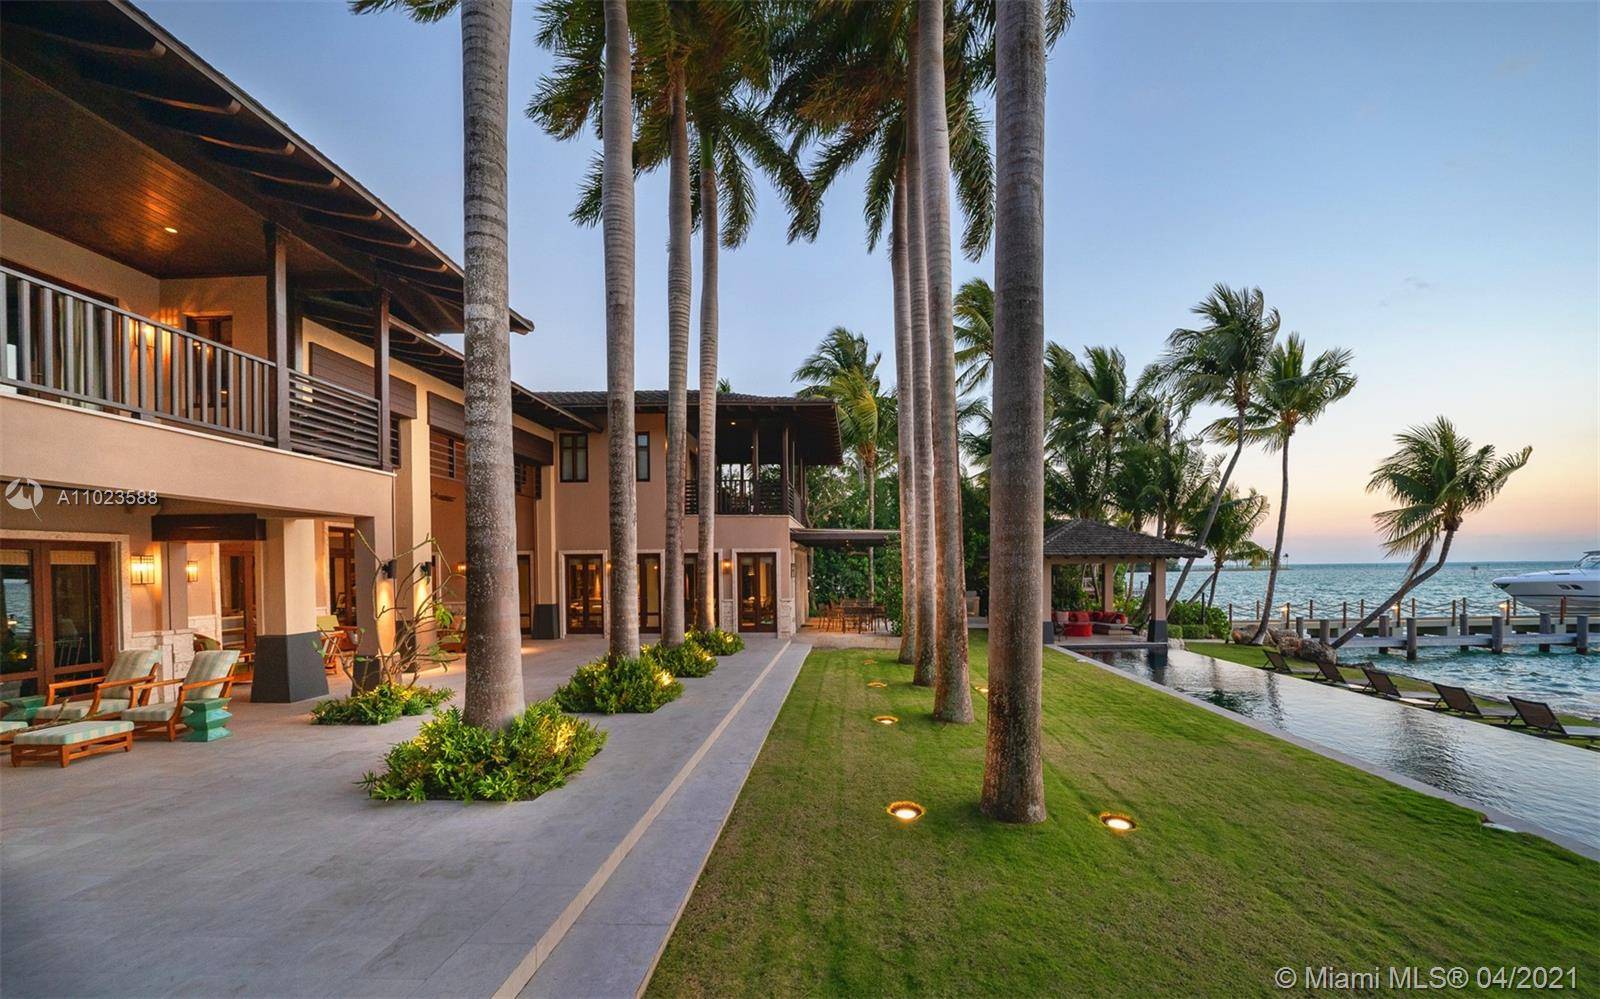 Welcome to one of the most refined waterfront residences in Florida.